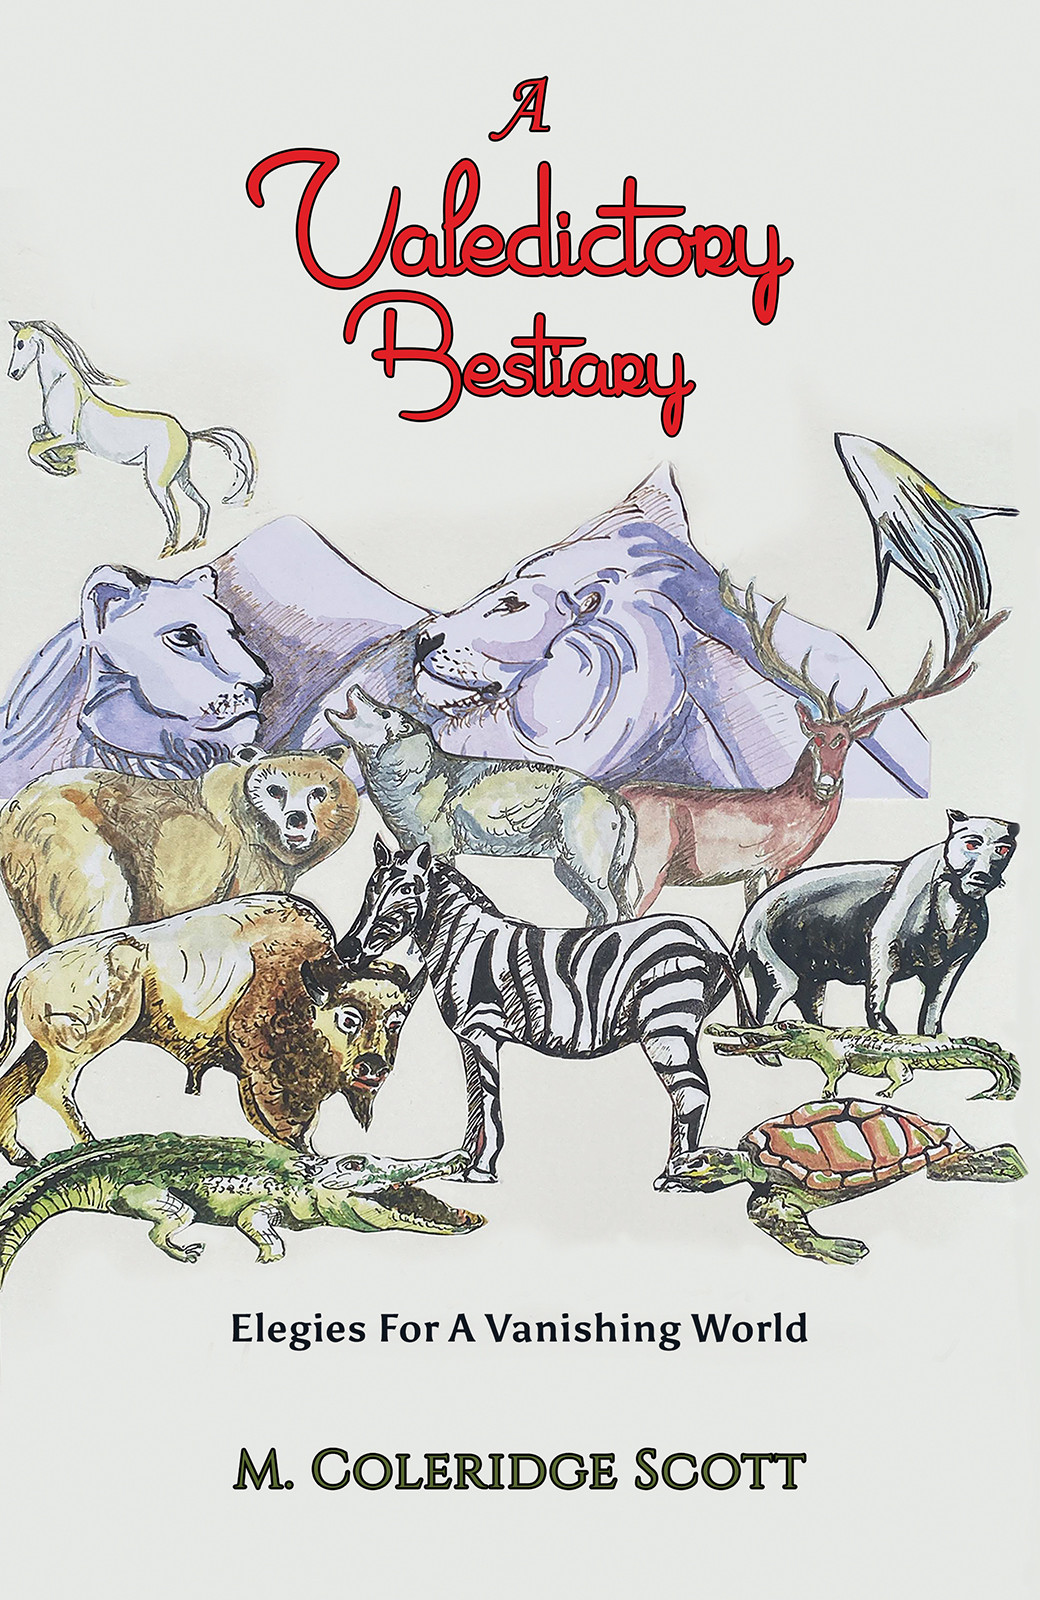 A Valedictory Bestiary-bookcover